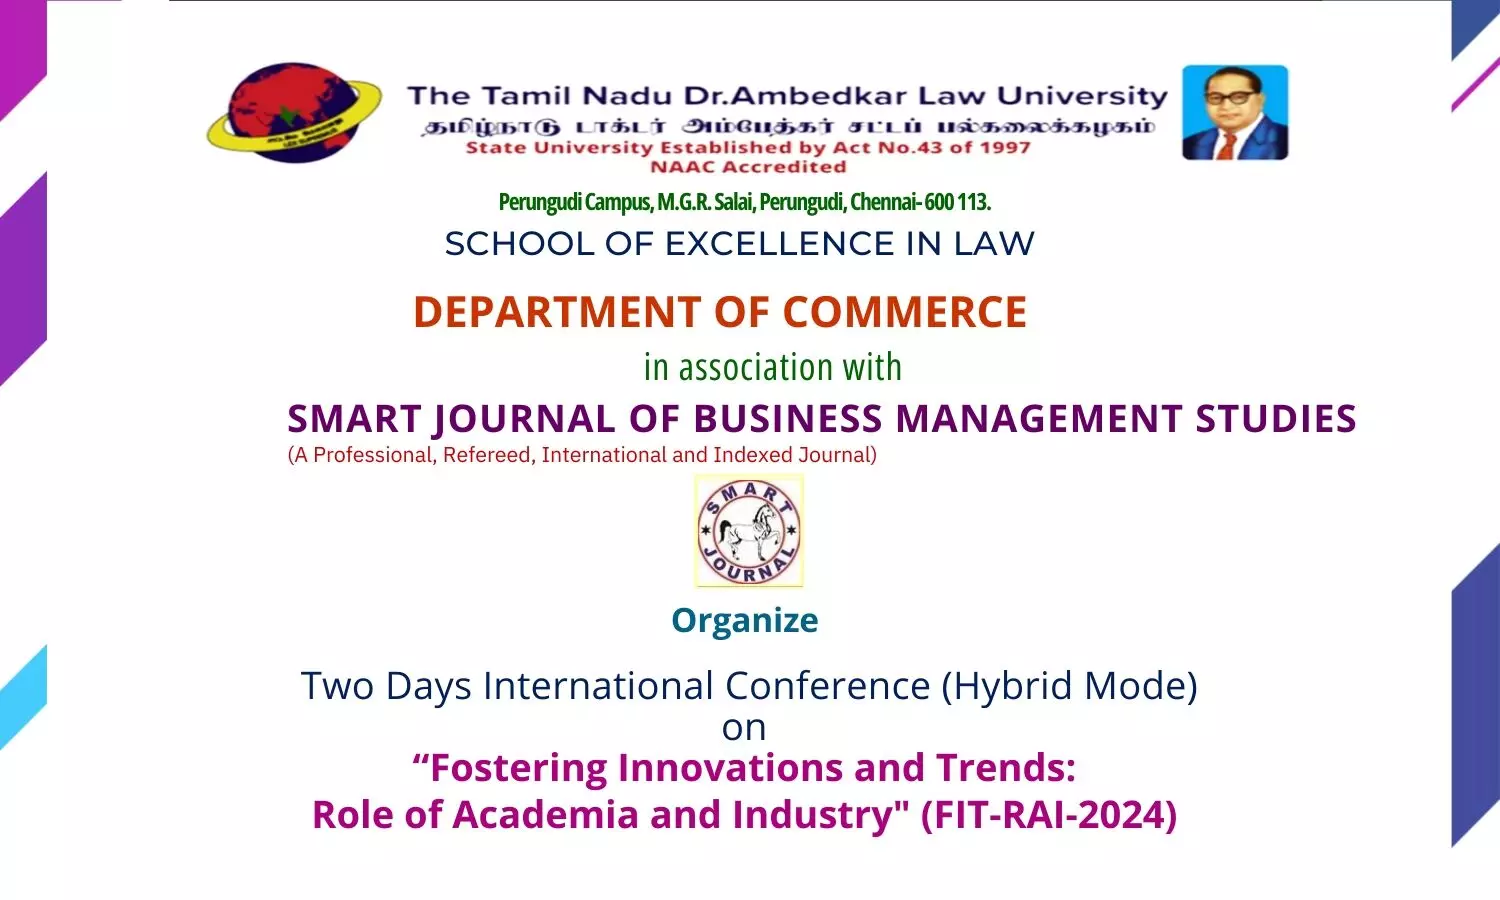 Conference on Fostering Innovations and Trends | School of Excellence in Law, TNDALU